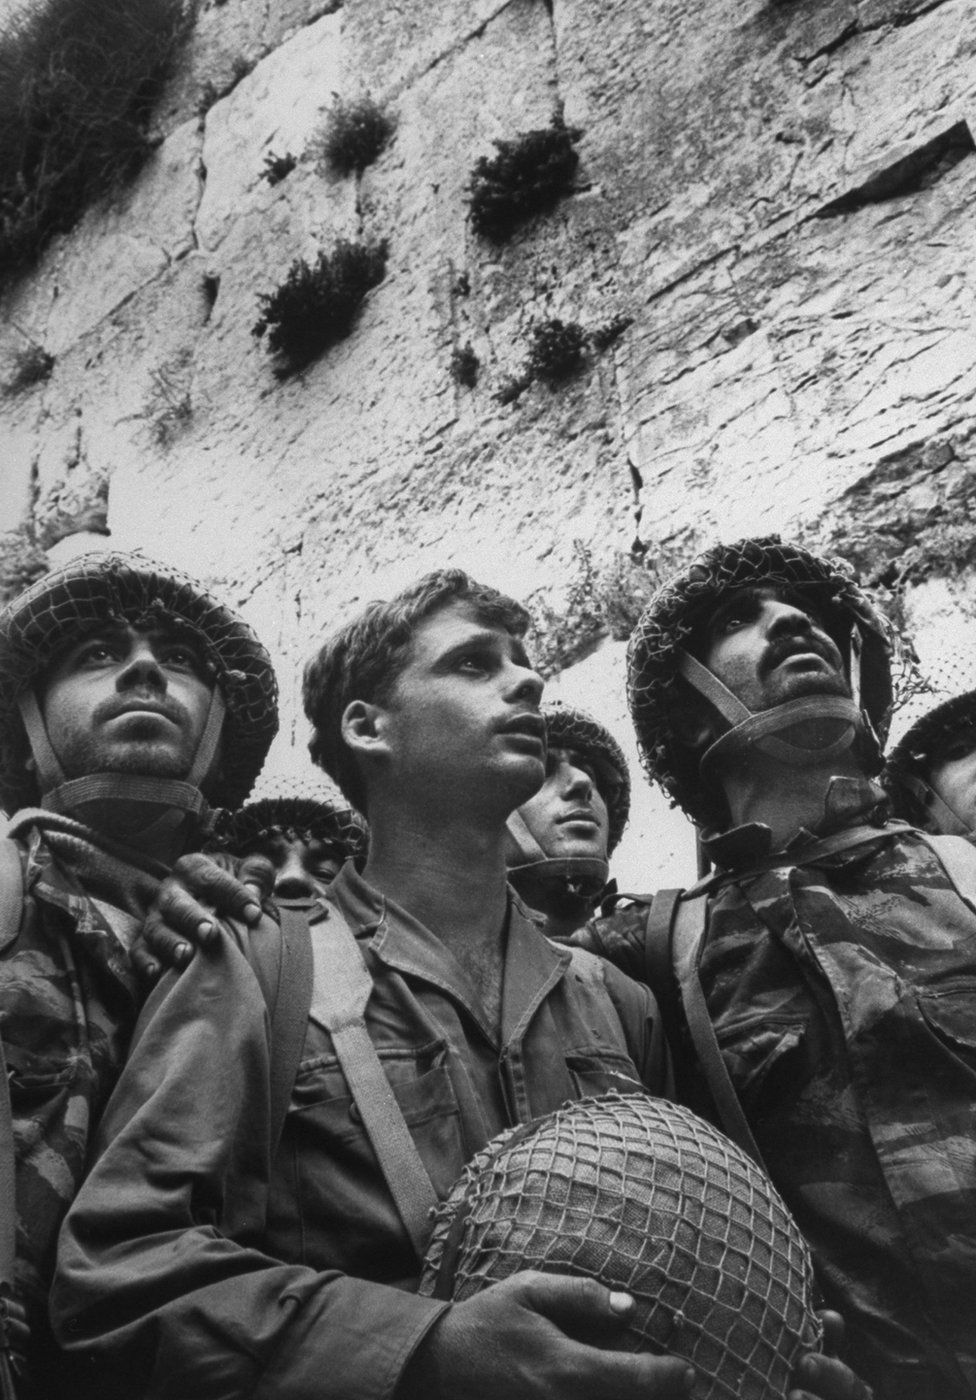 Israeli paratroopers gaze at Western Wall moments after recapture of Jewish holy site in Six-Day War, 1967